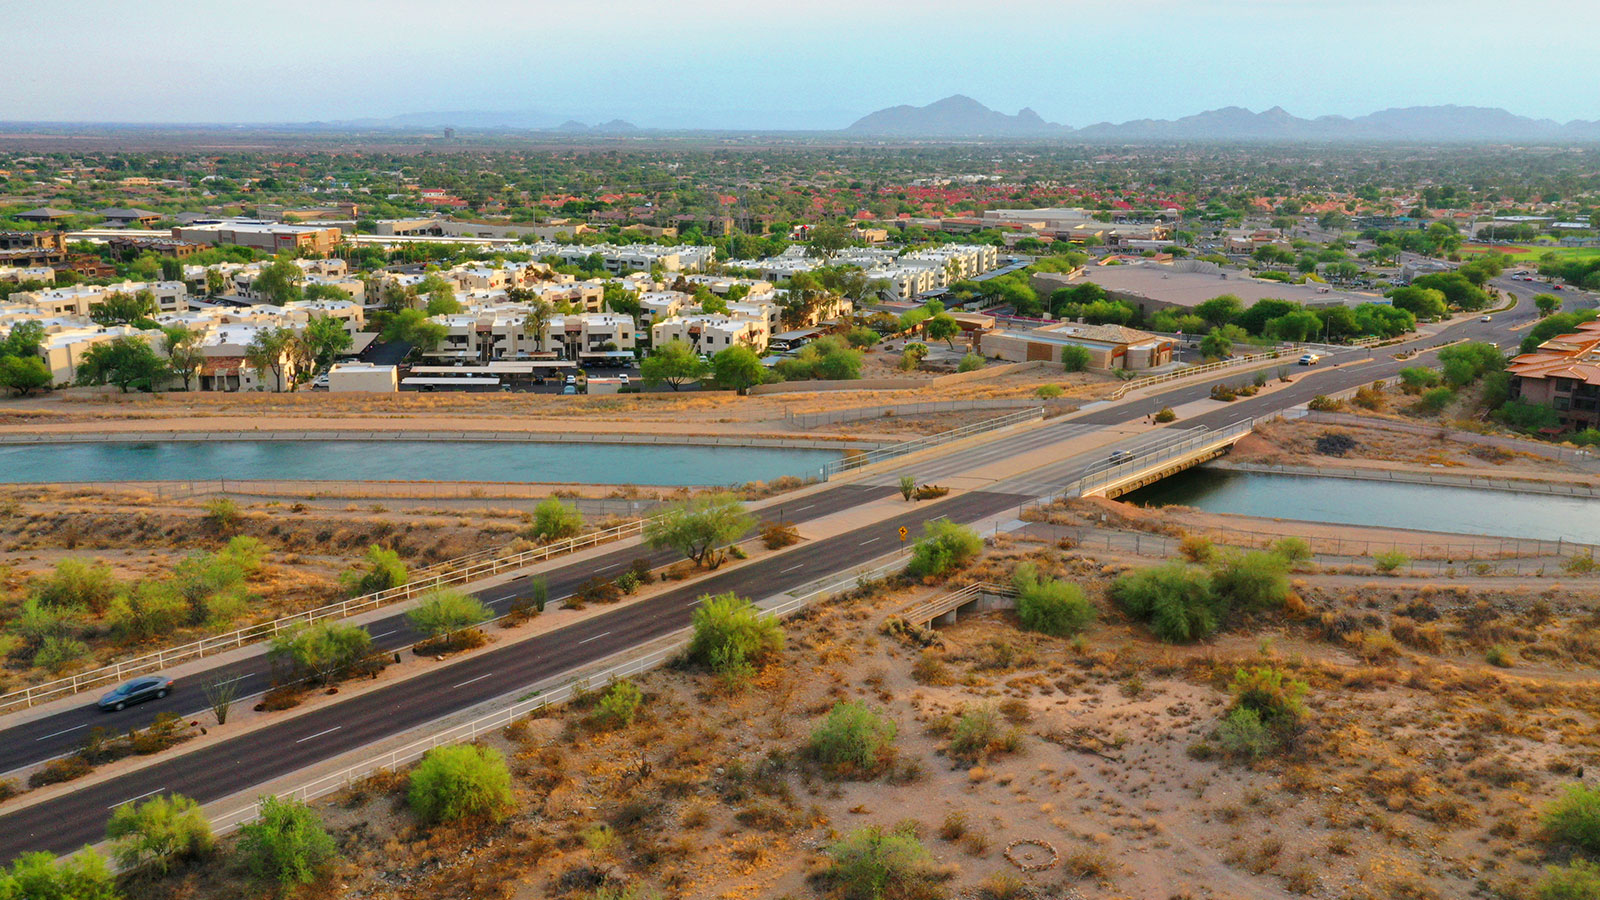 Scottsdale, Arizona highway over a river with buildings, green trees, and mountains in the distance